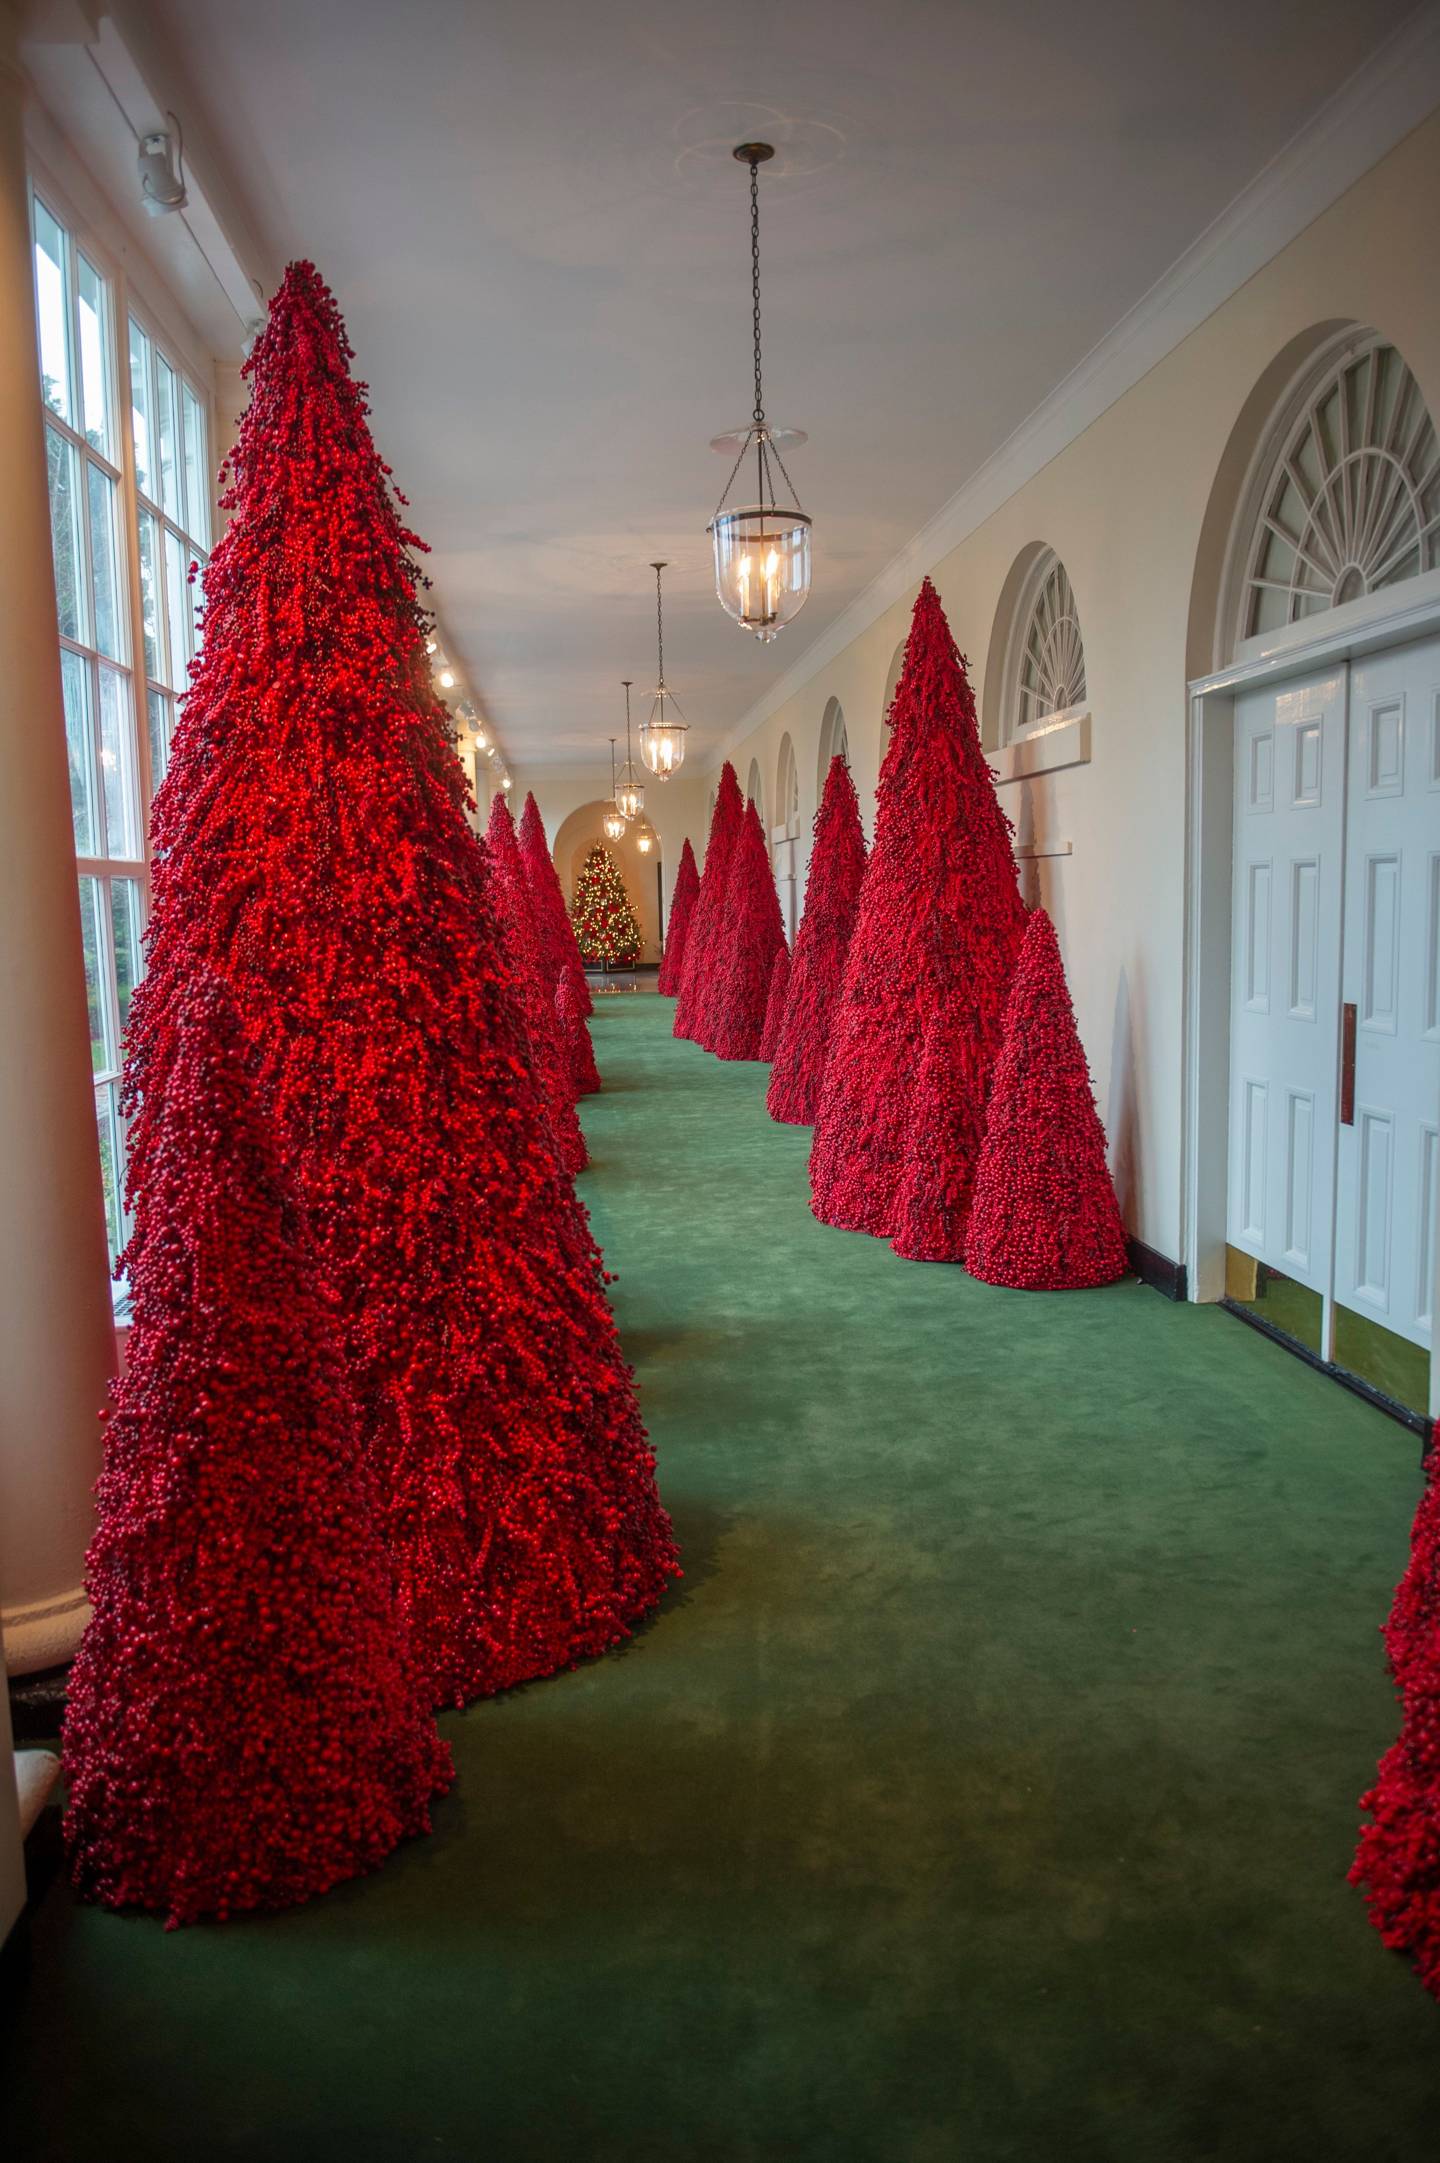 White House Christmas decorations | House & Garden